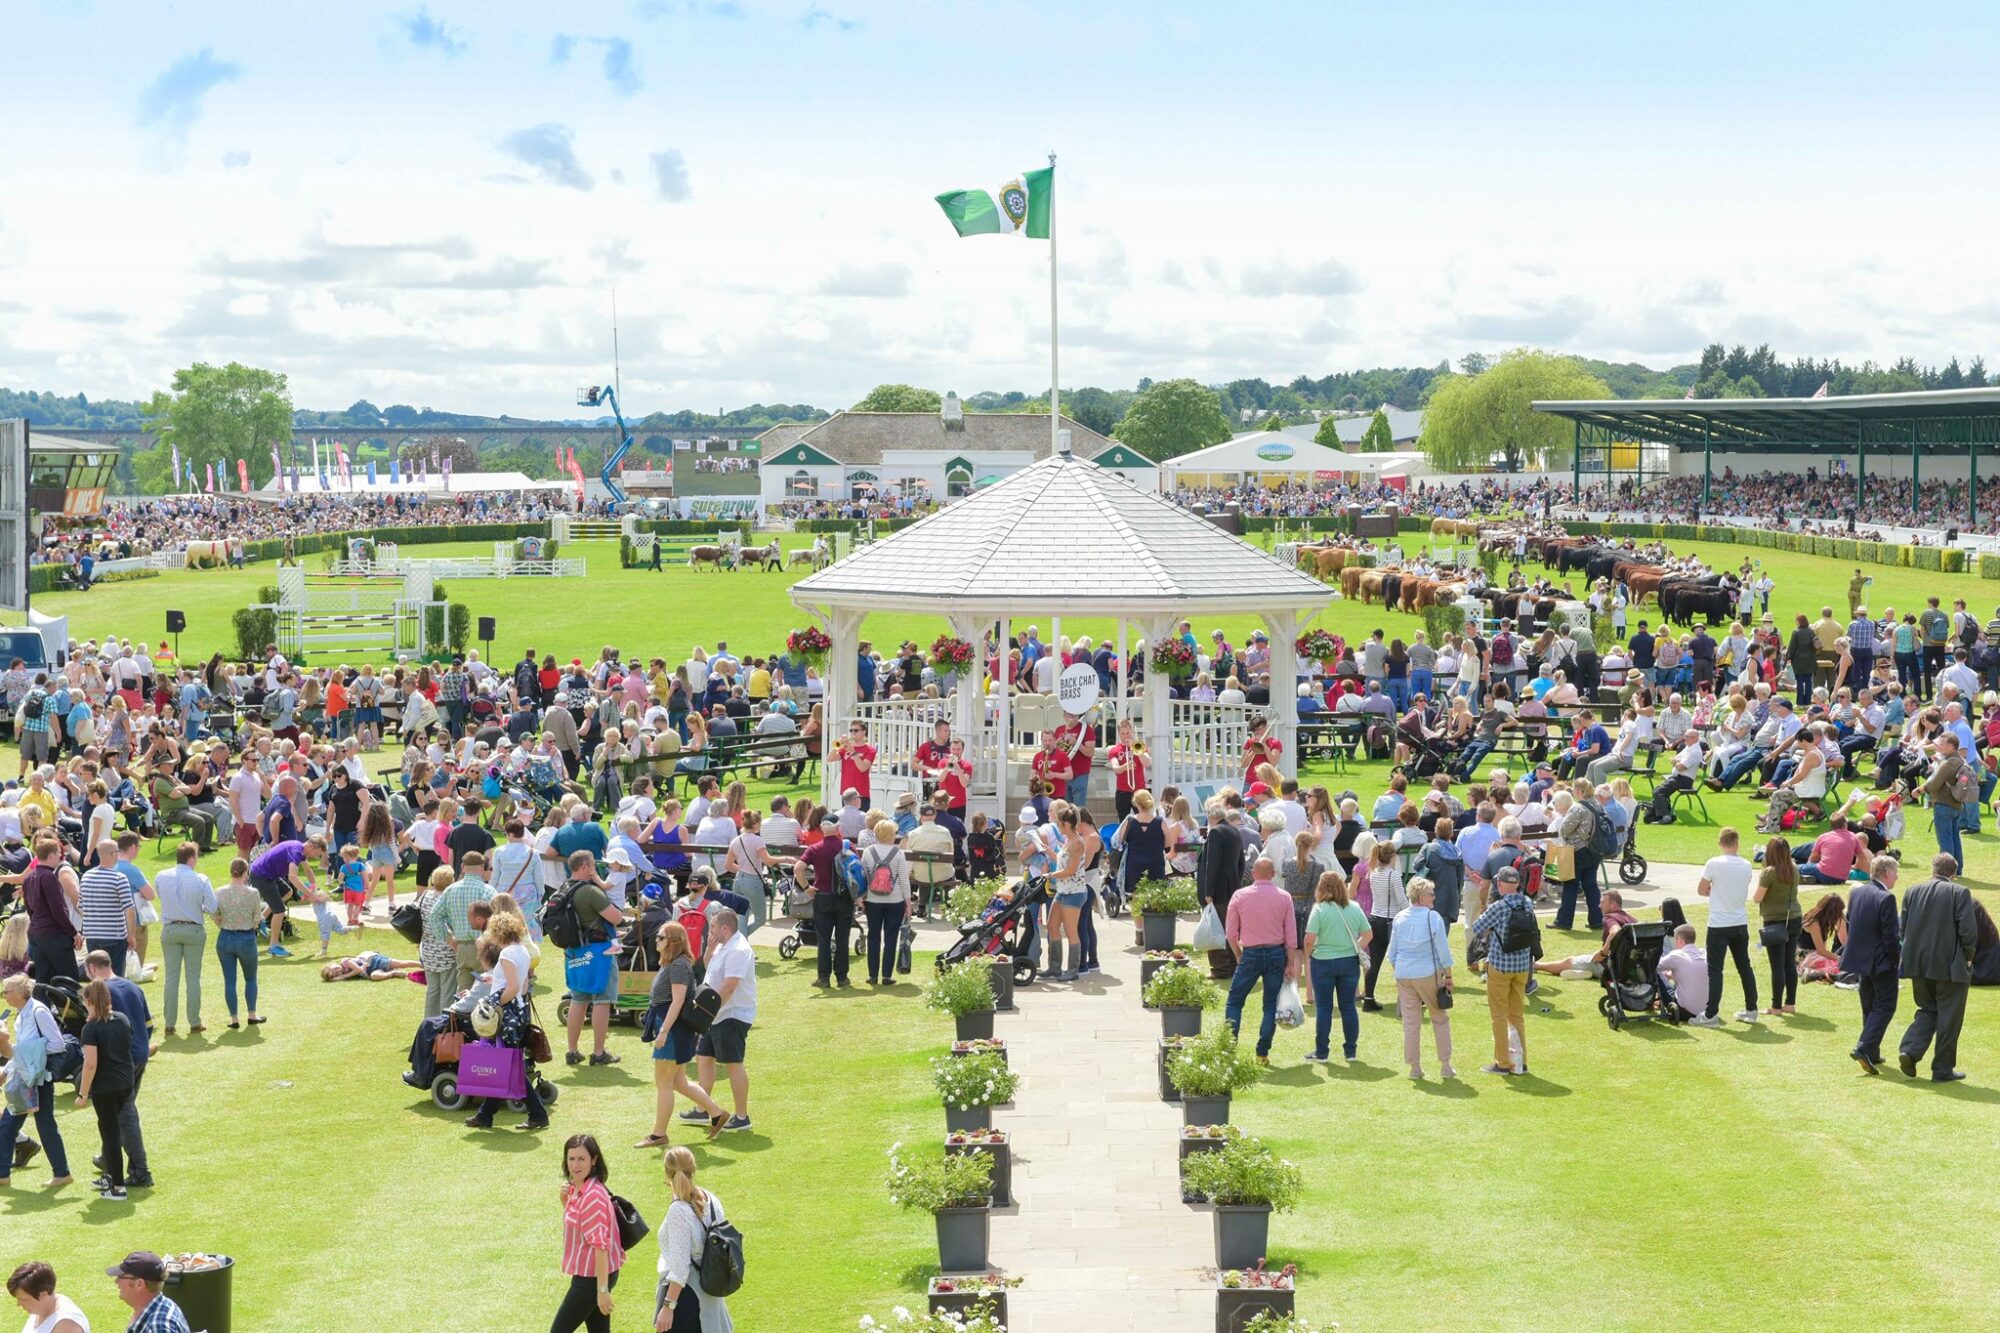 Image name great yorkshire show main ring the 6 image from the post Celebrity farmers attending 2022 Great Yorkshire Show announced in Yorkshire.com.